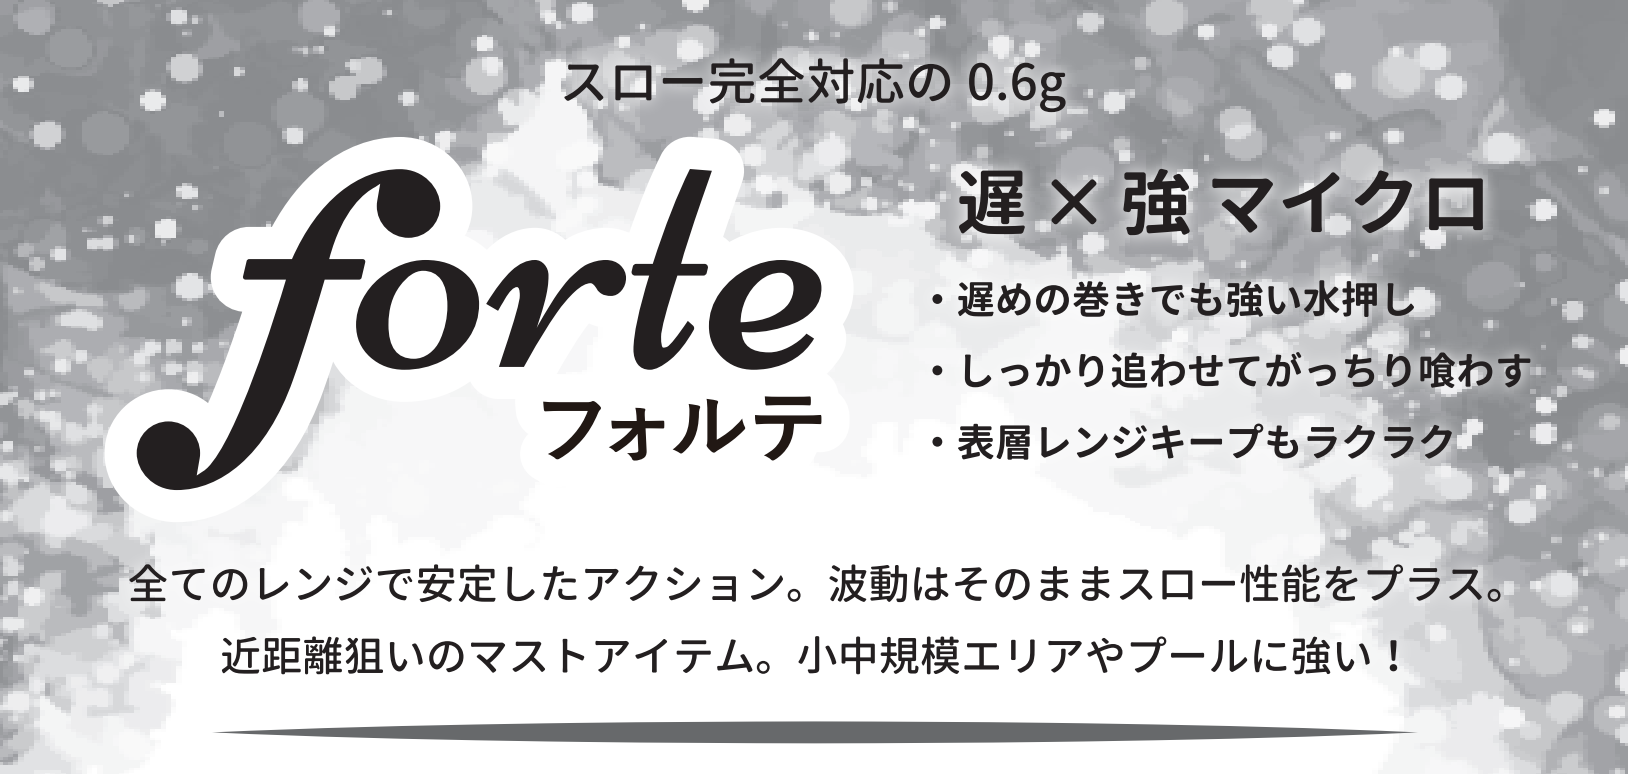 forte 0.6g（フォルテ0.6g） – t-Route